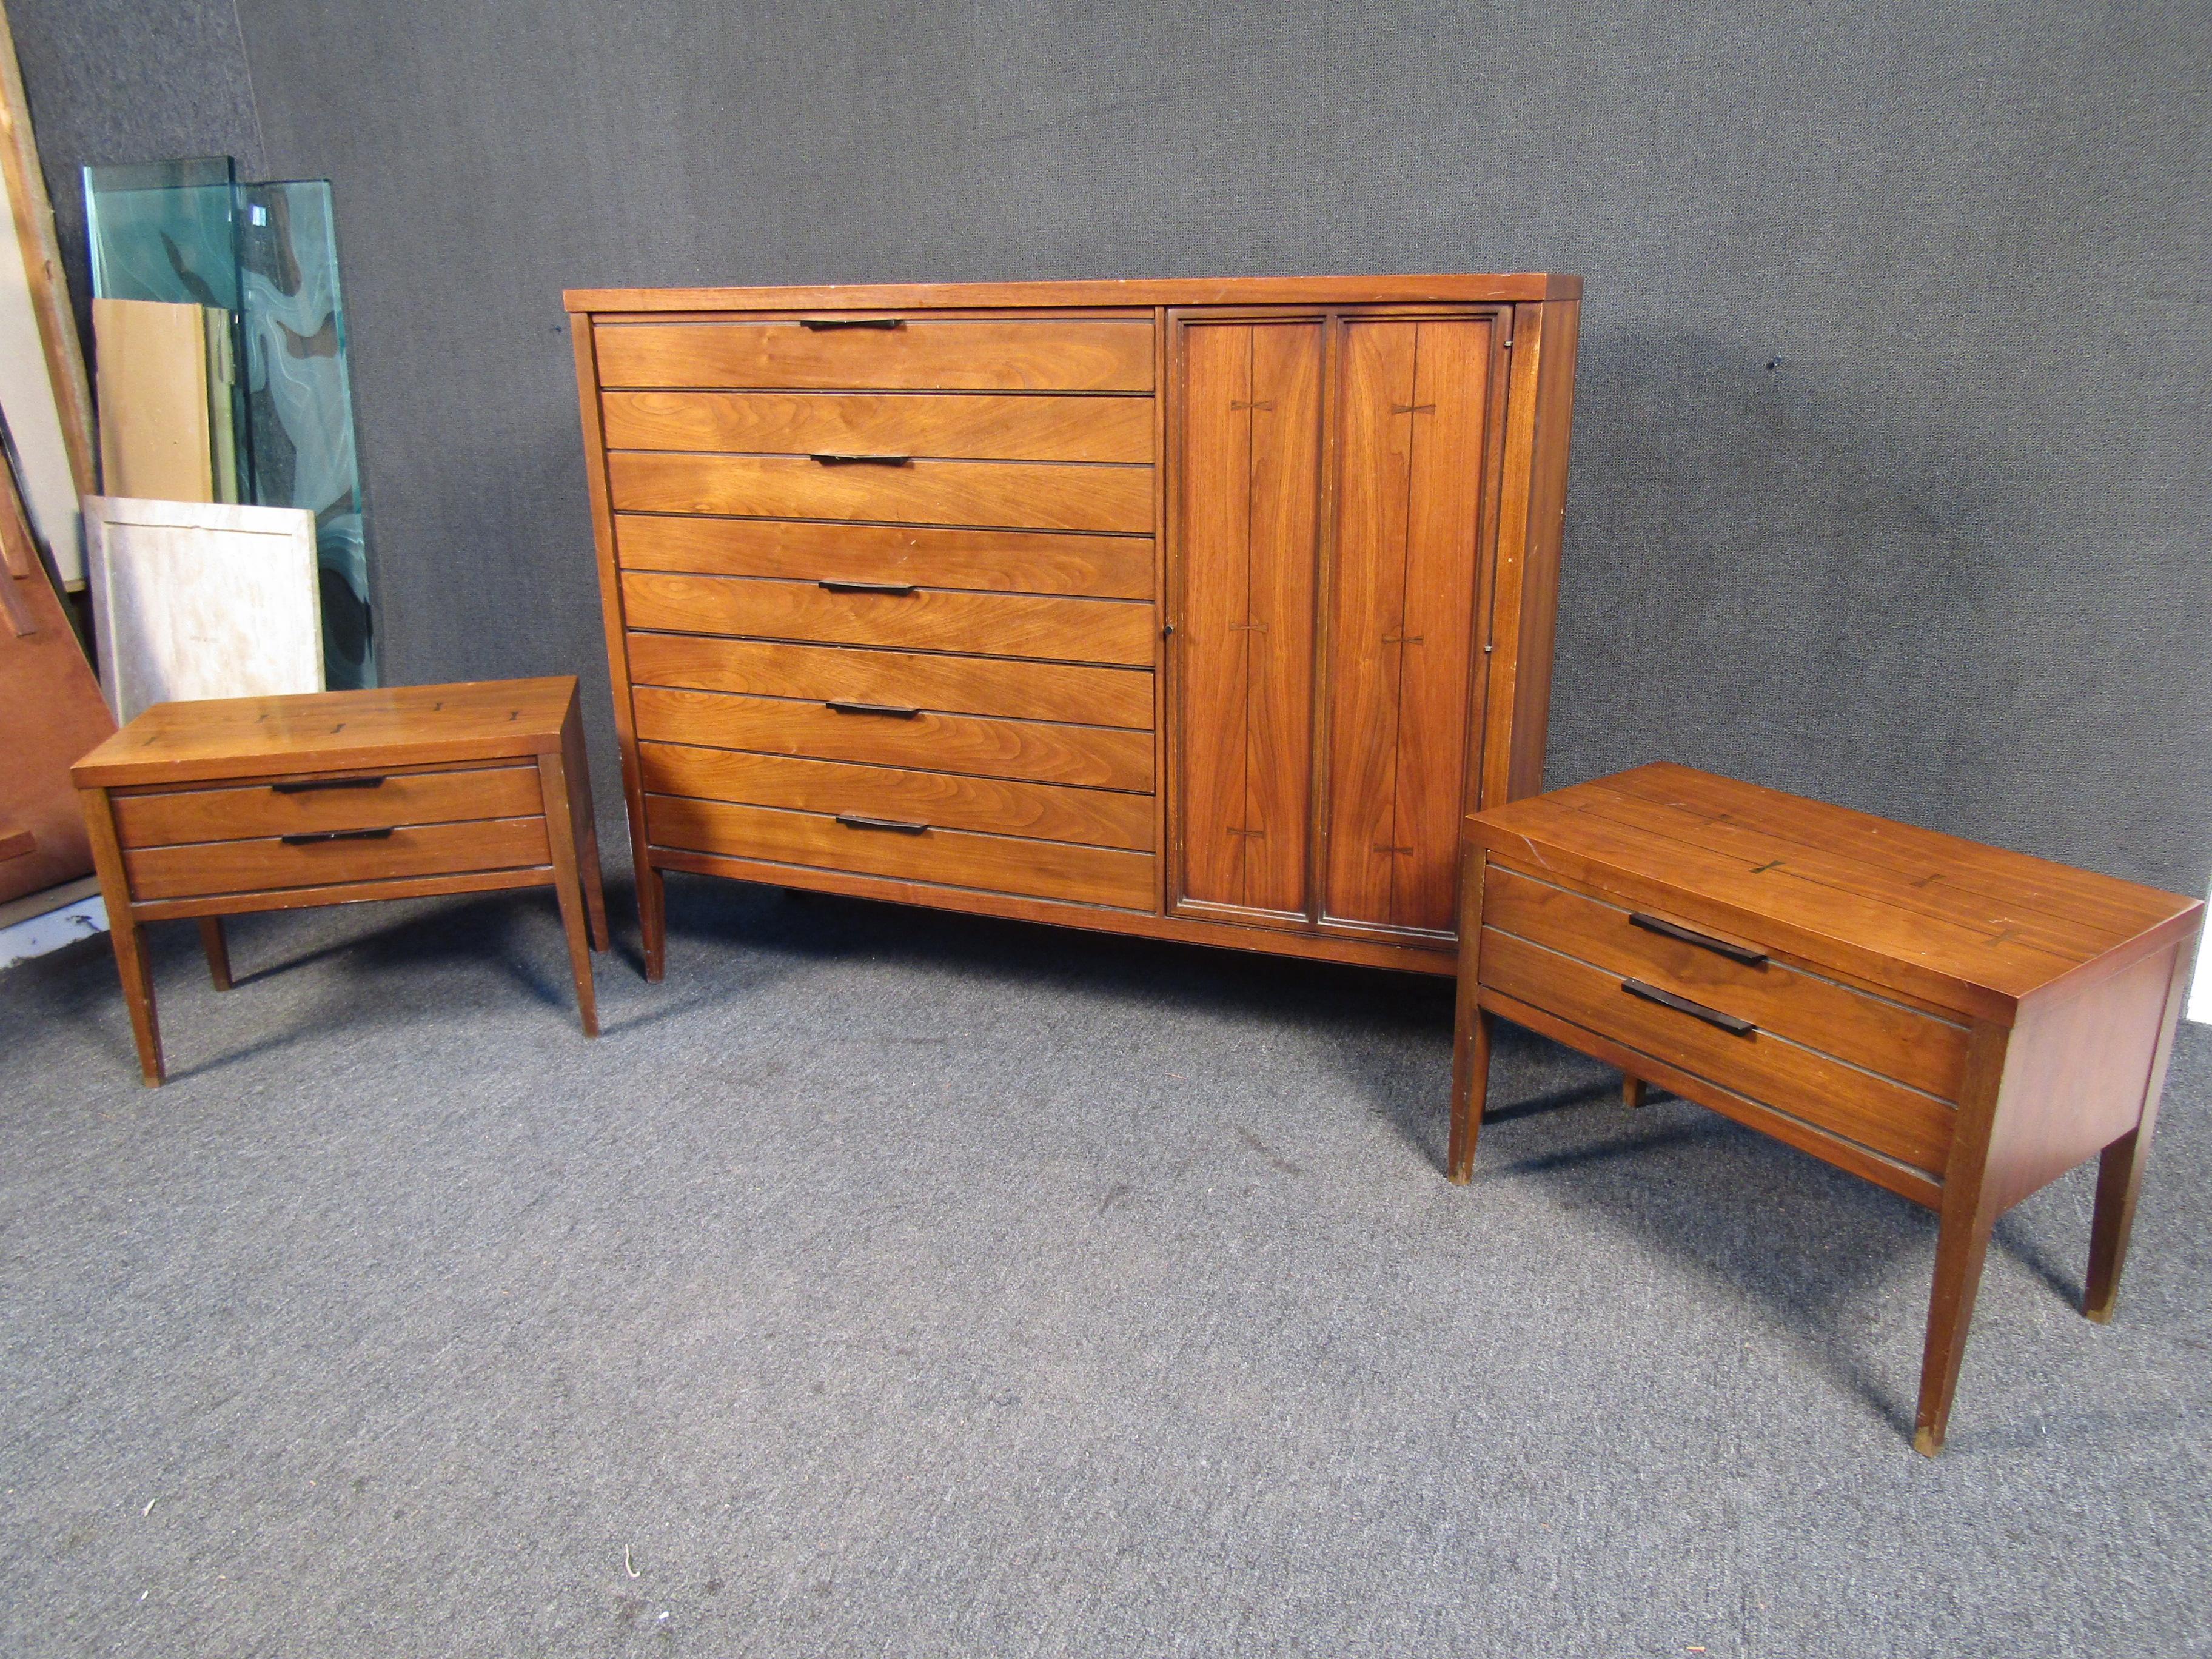 Tall  chest of drawers and matching end tables by Lane Furniture. Walnut wood with rosewood inlay 